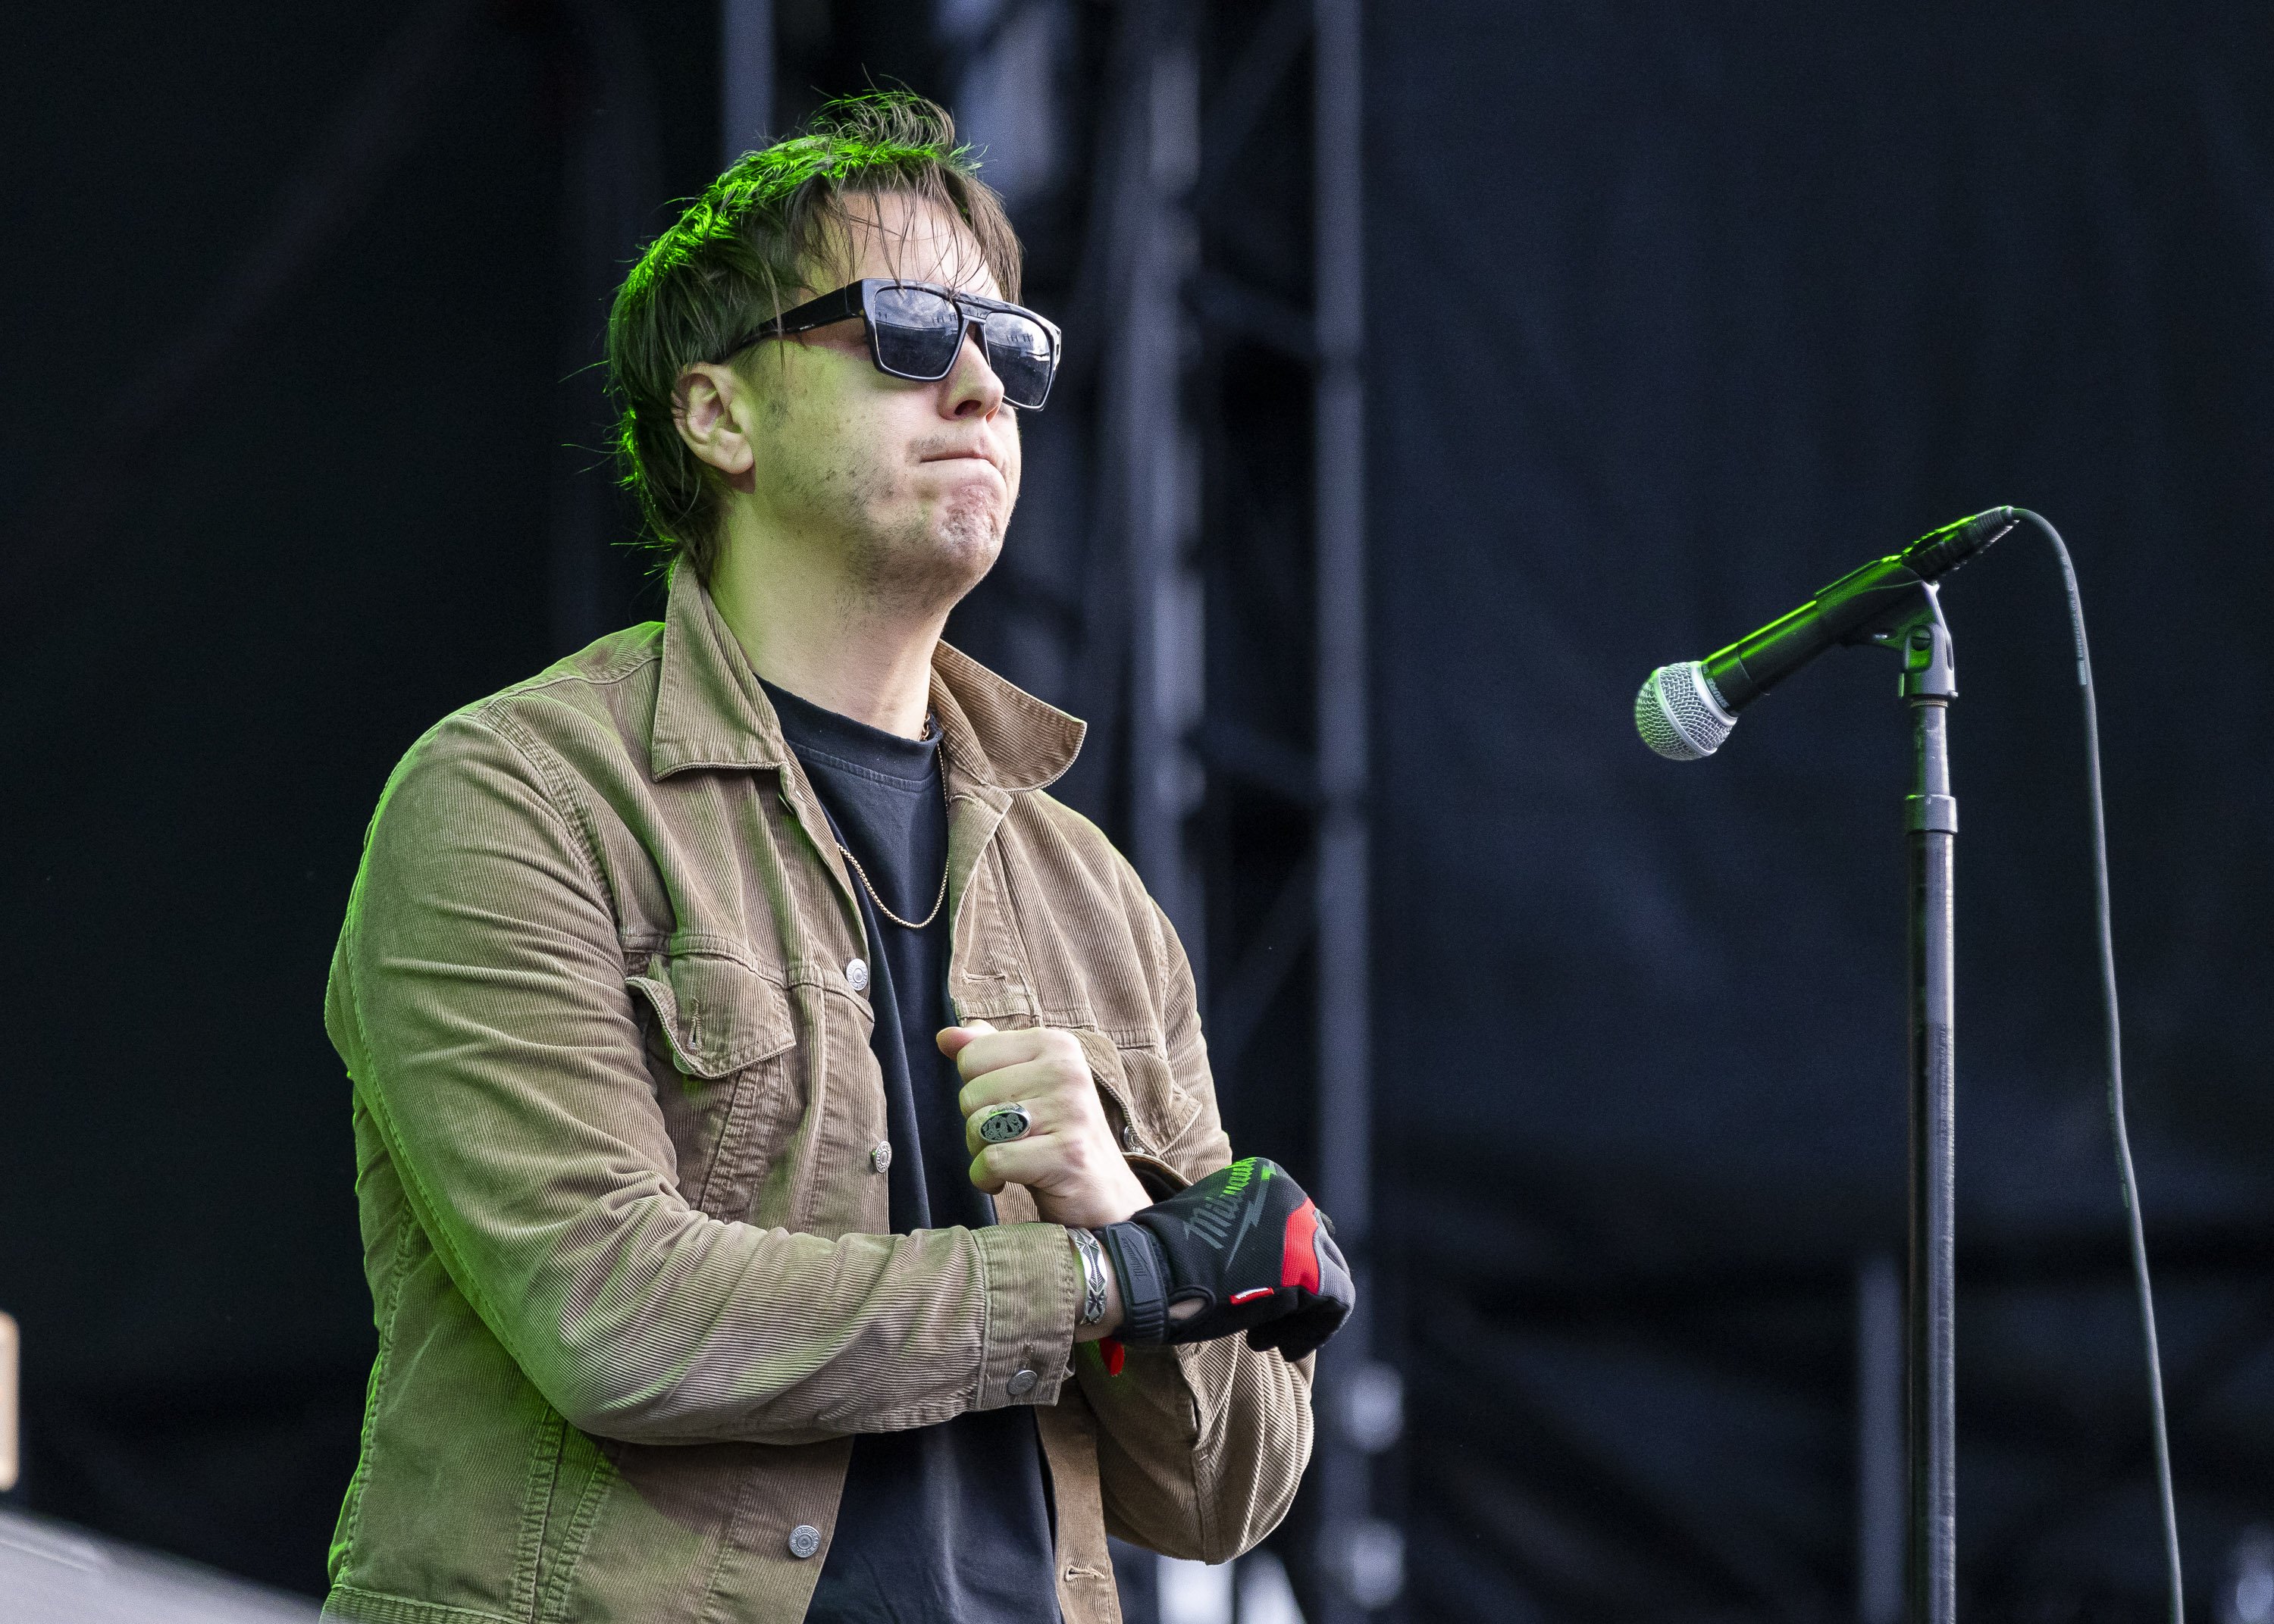 Julian Casablancas on stage at Comerica Park in Detroit, Michigan on August 14, 2022. | Source: Getty Images